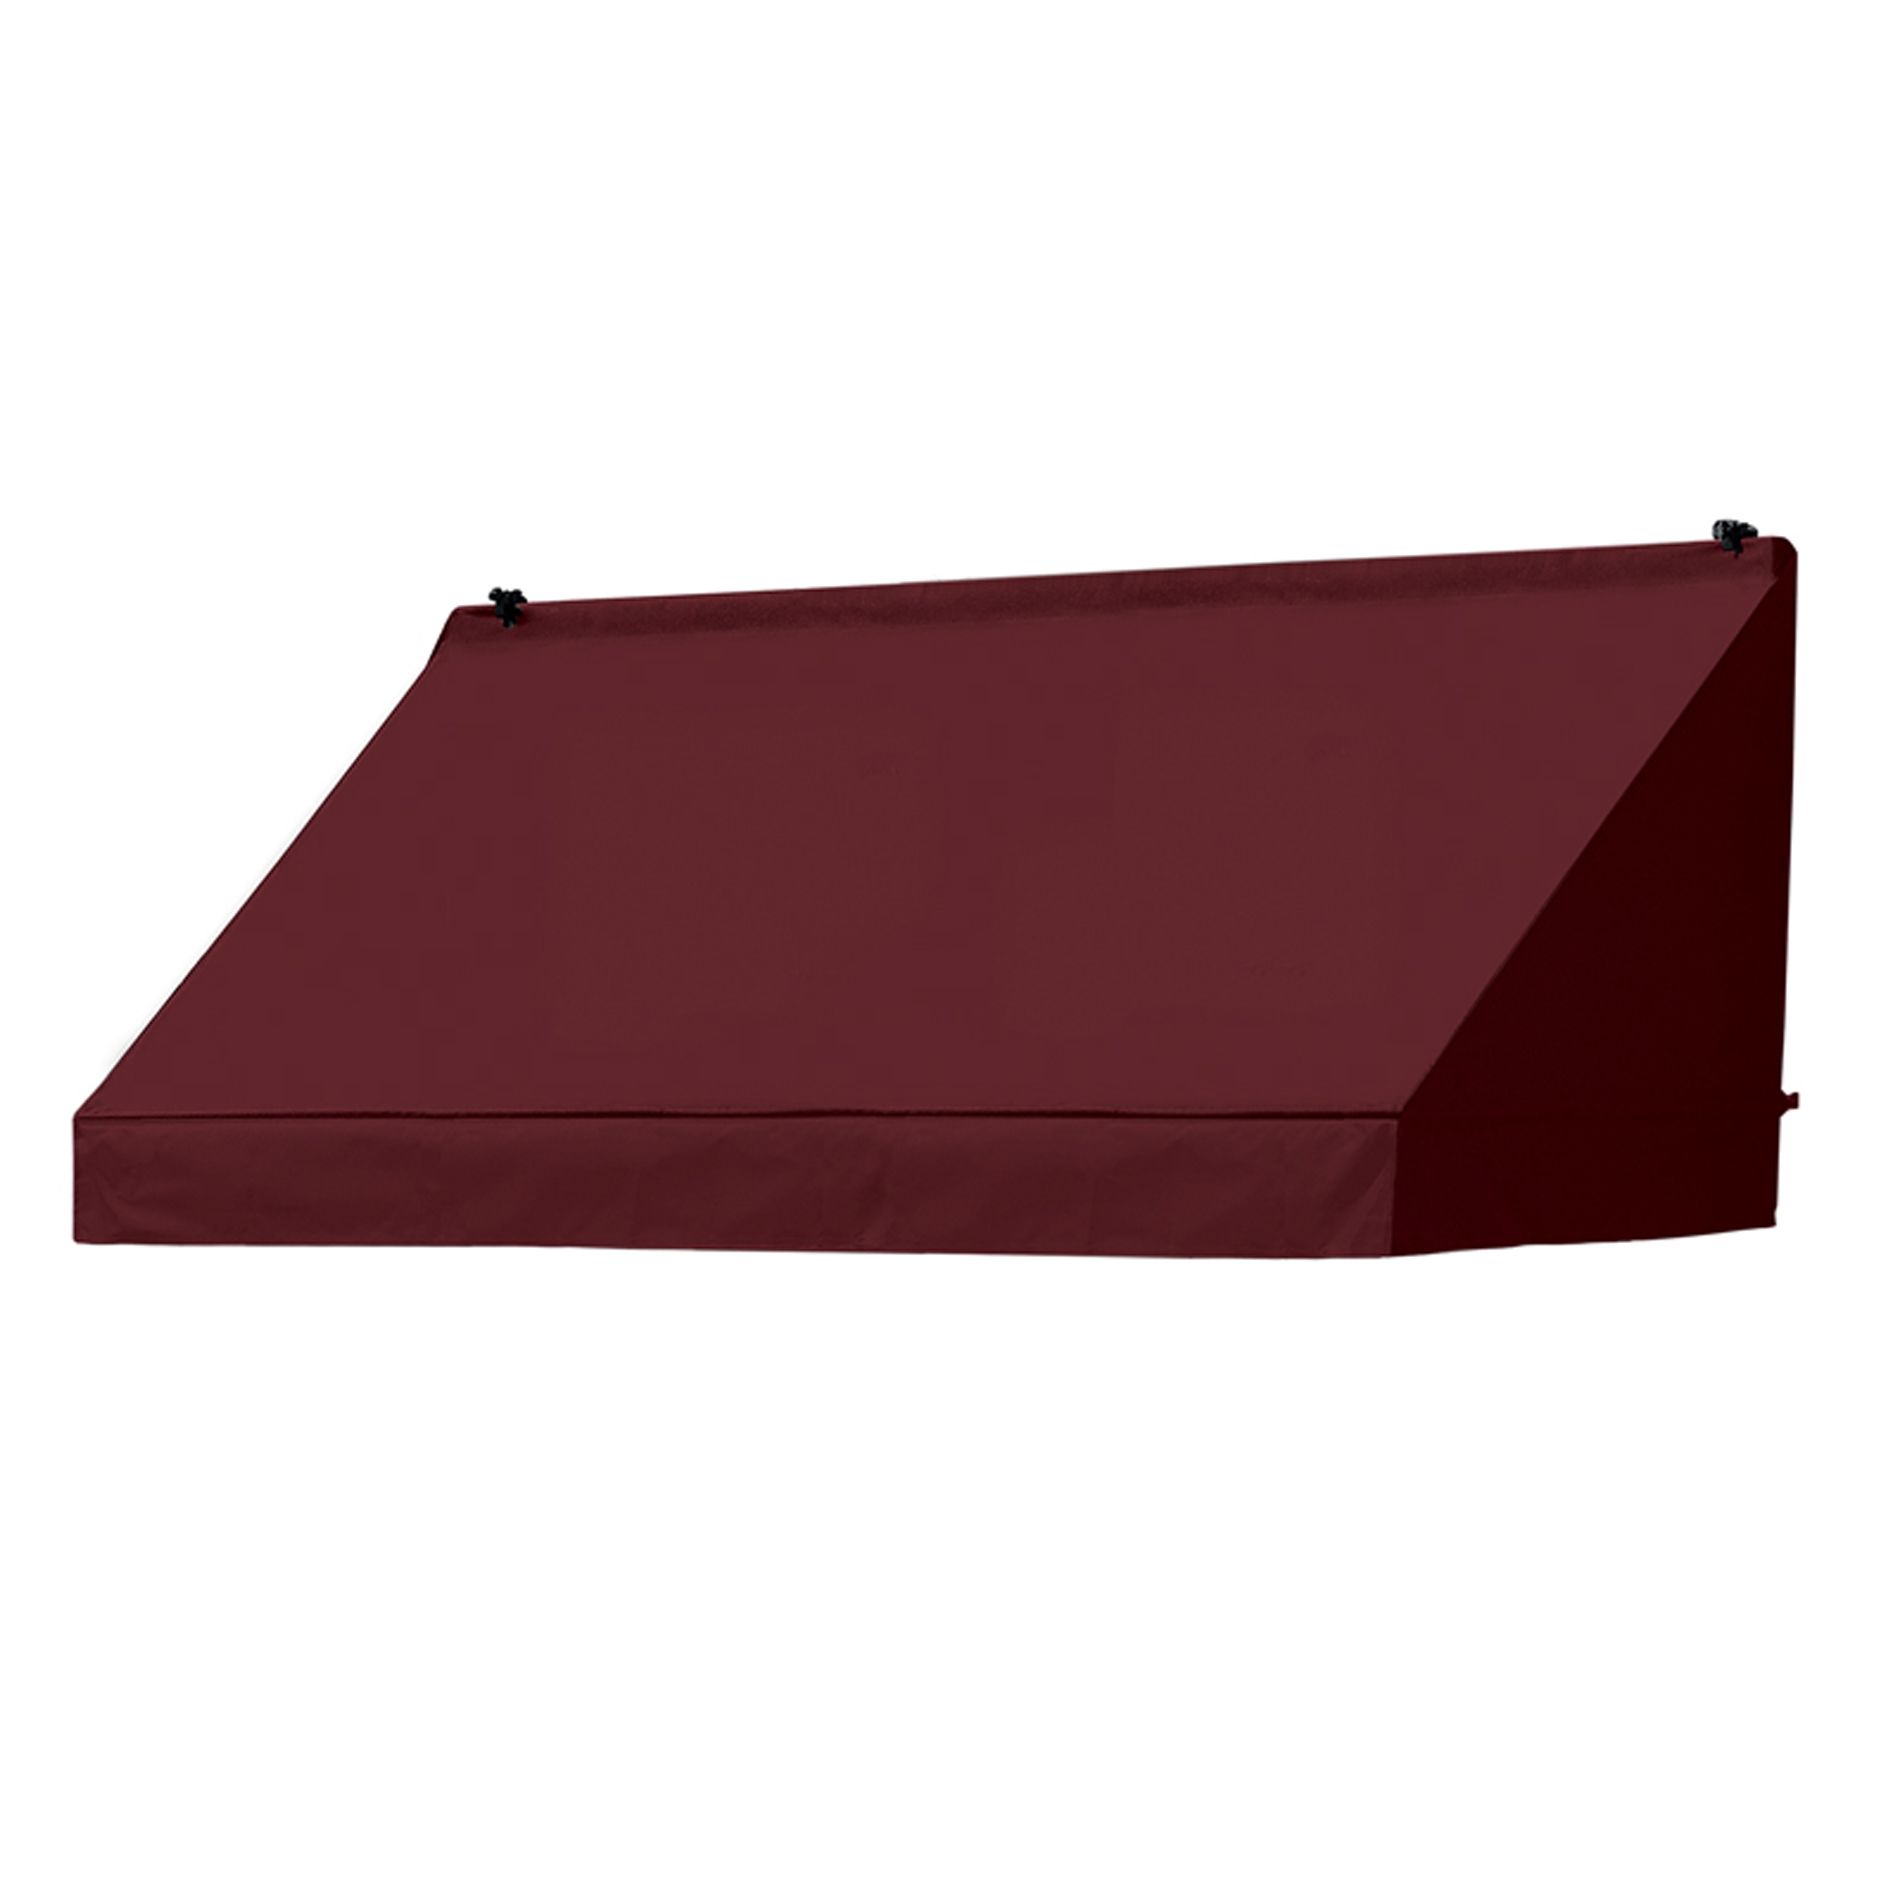 Awnings in a Box&reg; 6&#8217; Classic Awning Replacement Cover